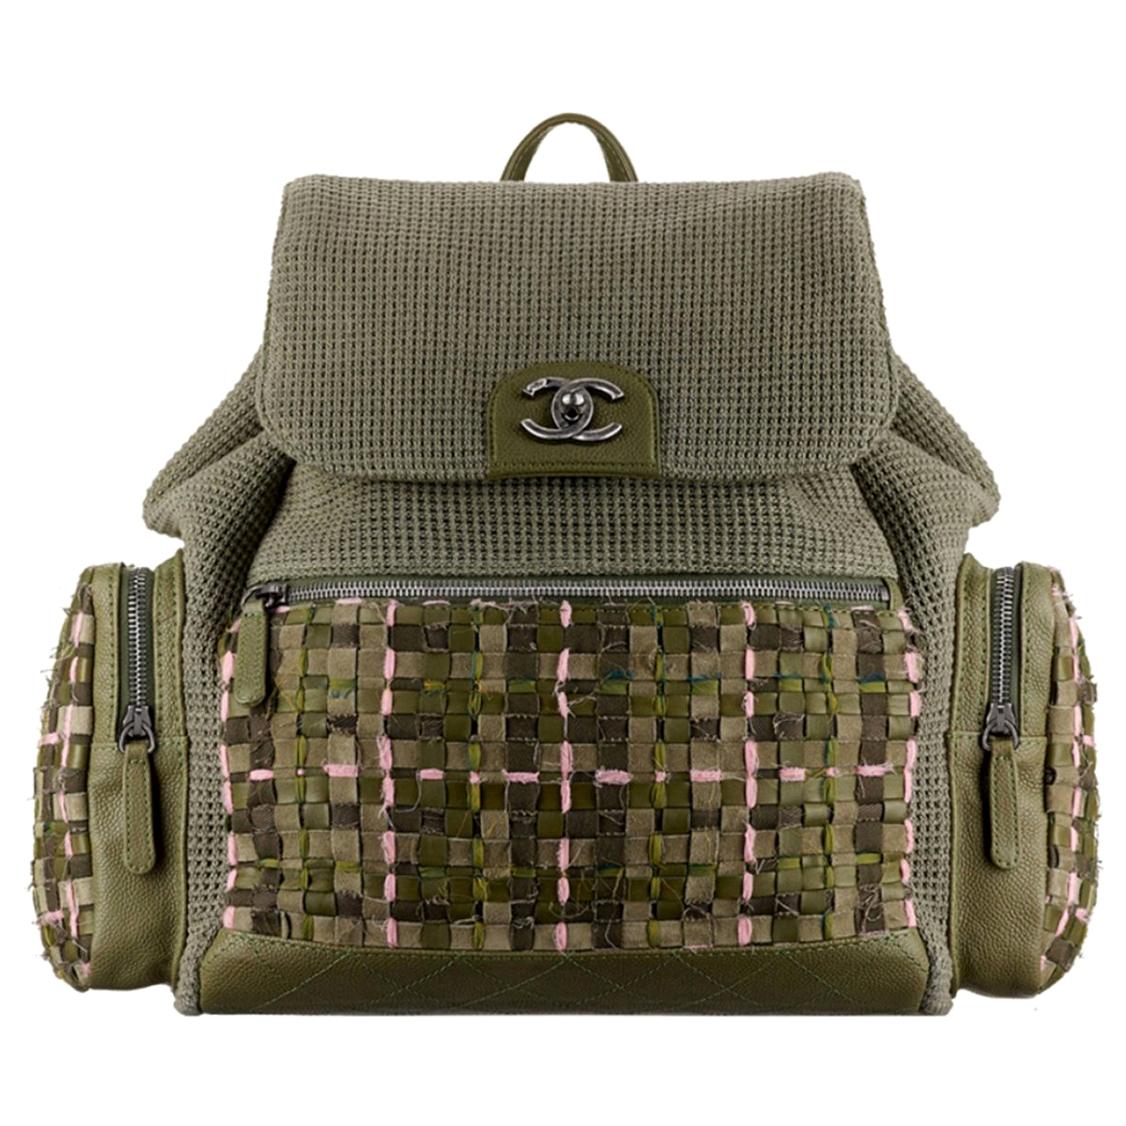 Chanel Pocket Backpack Bag in Woven Tweed and Canvas 